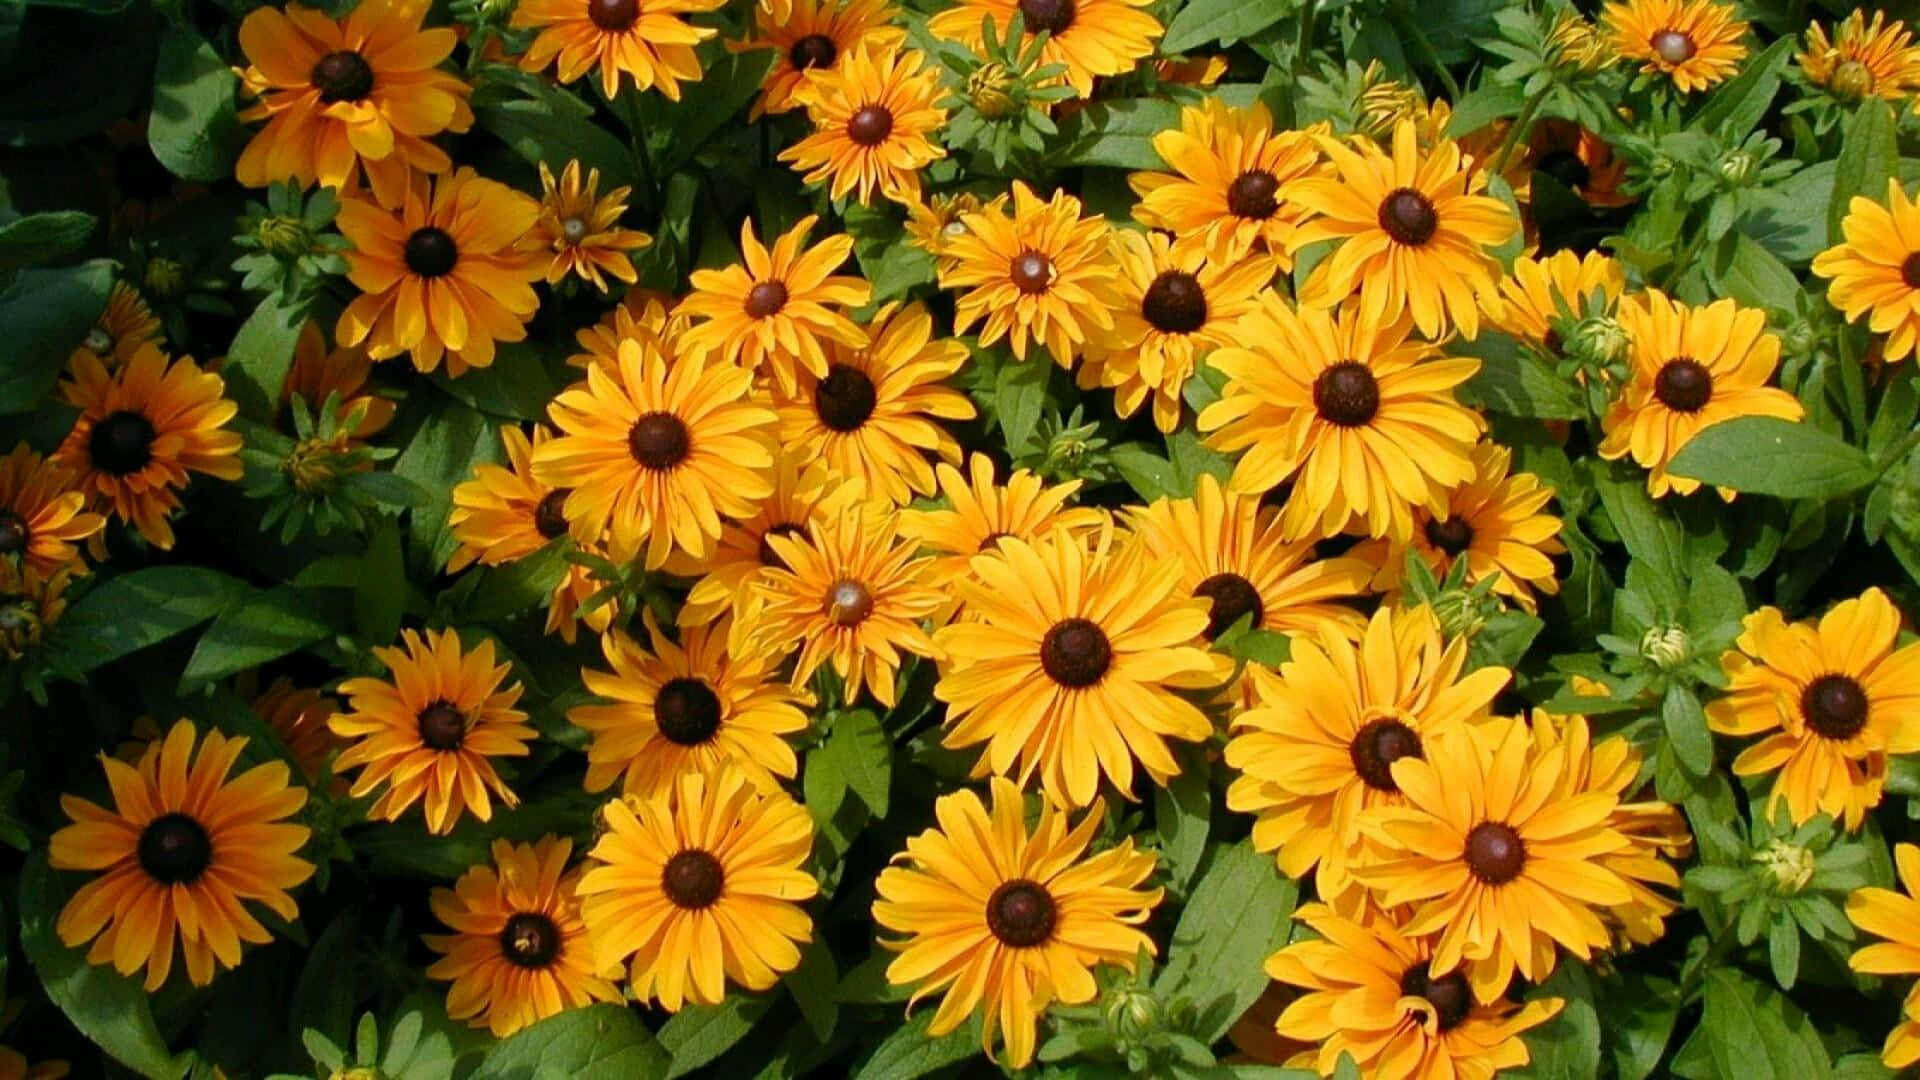 "A bloom of Black Eyed Susan wildflowers in the summer sunshine" Wallpaper